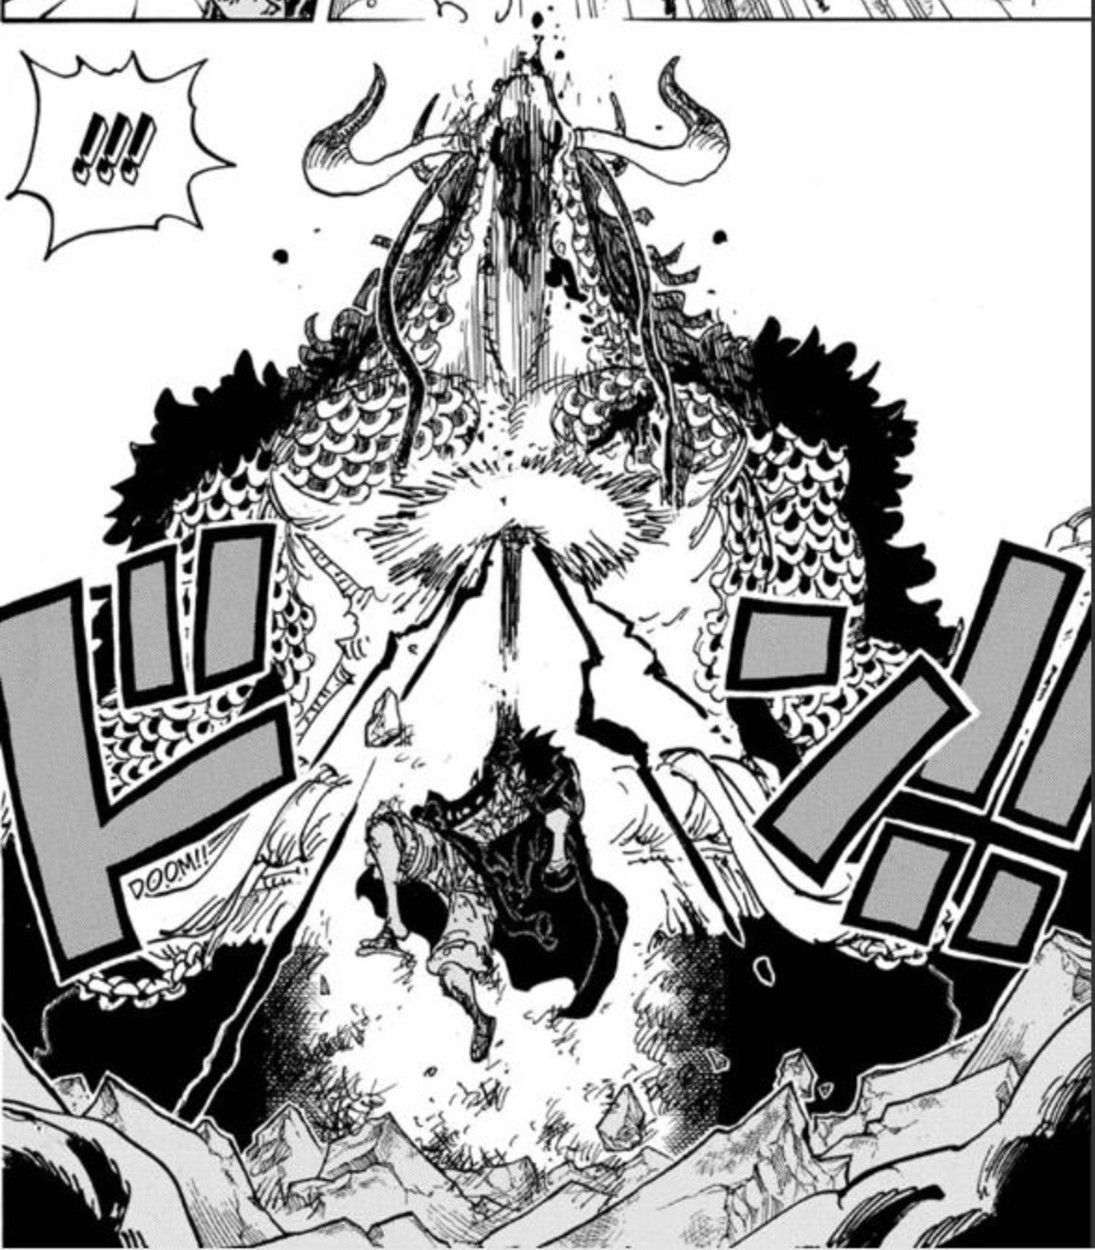 Monkey D. Luffy imbues his uppercut with Conqueror's Haki to deal damage to Kaido in One Piece's Chapter 1010